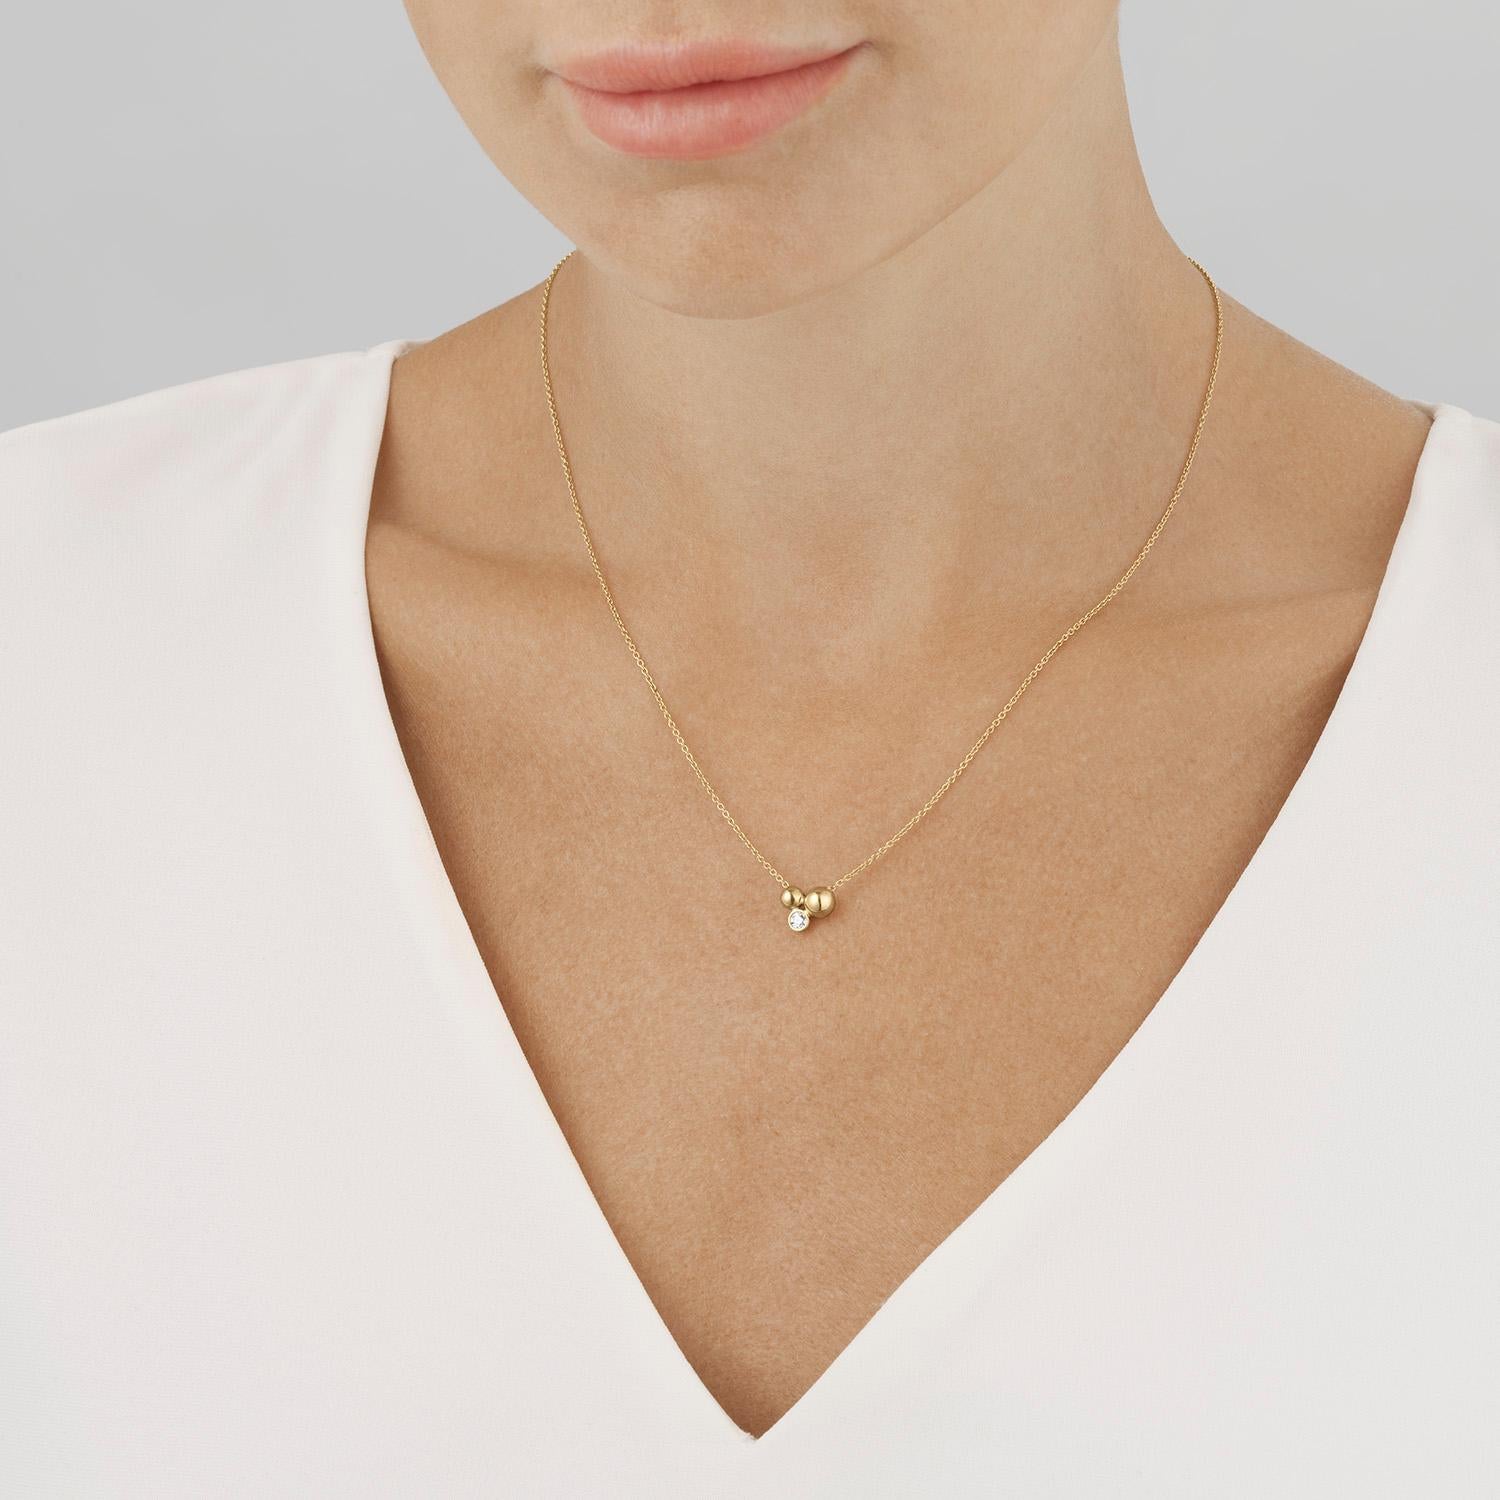 With its two beads of 18 karat recycled yellow gold clustered together with a single brilliant cut diamond, this pendant is an understated but luxurious piece of jewellery. Combining classic elegance with contemporary sophistication, the pendant